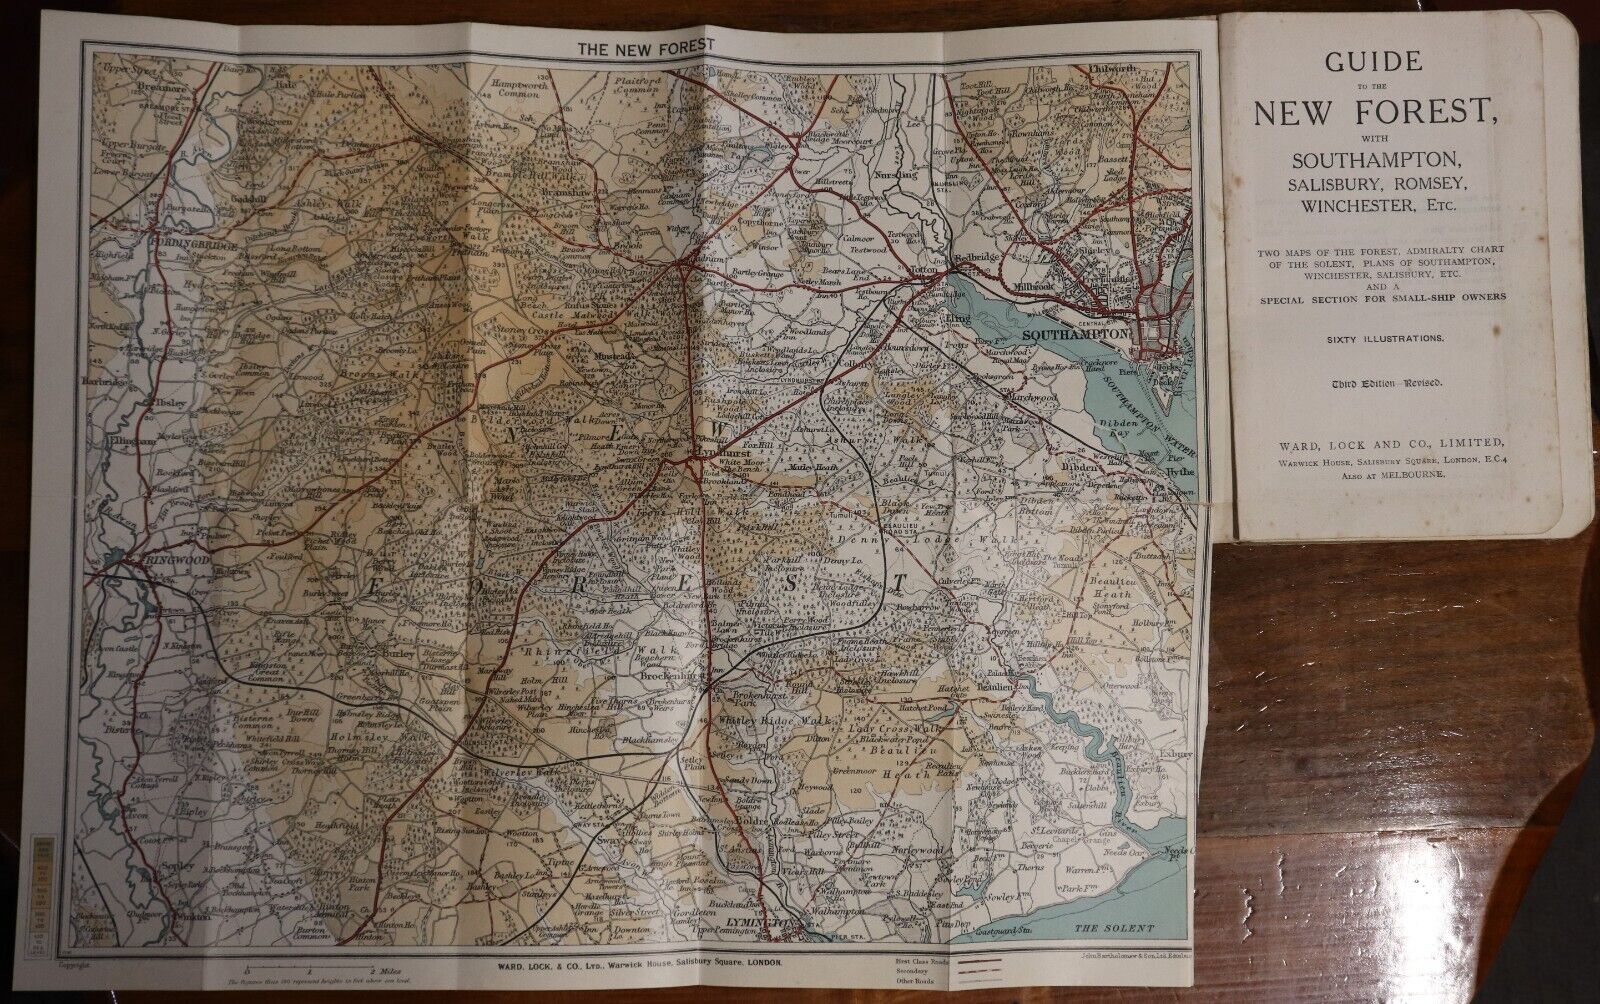 Guide To New Forest: Ward Lock & Co - 1940 - Antique Travel Guide Book w/Maps